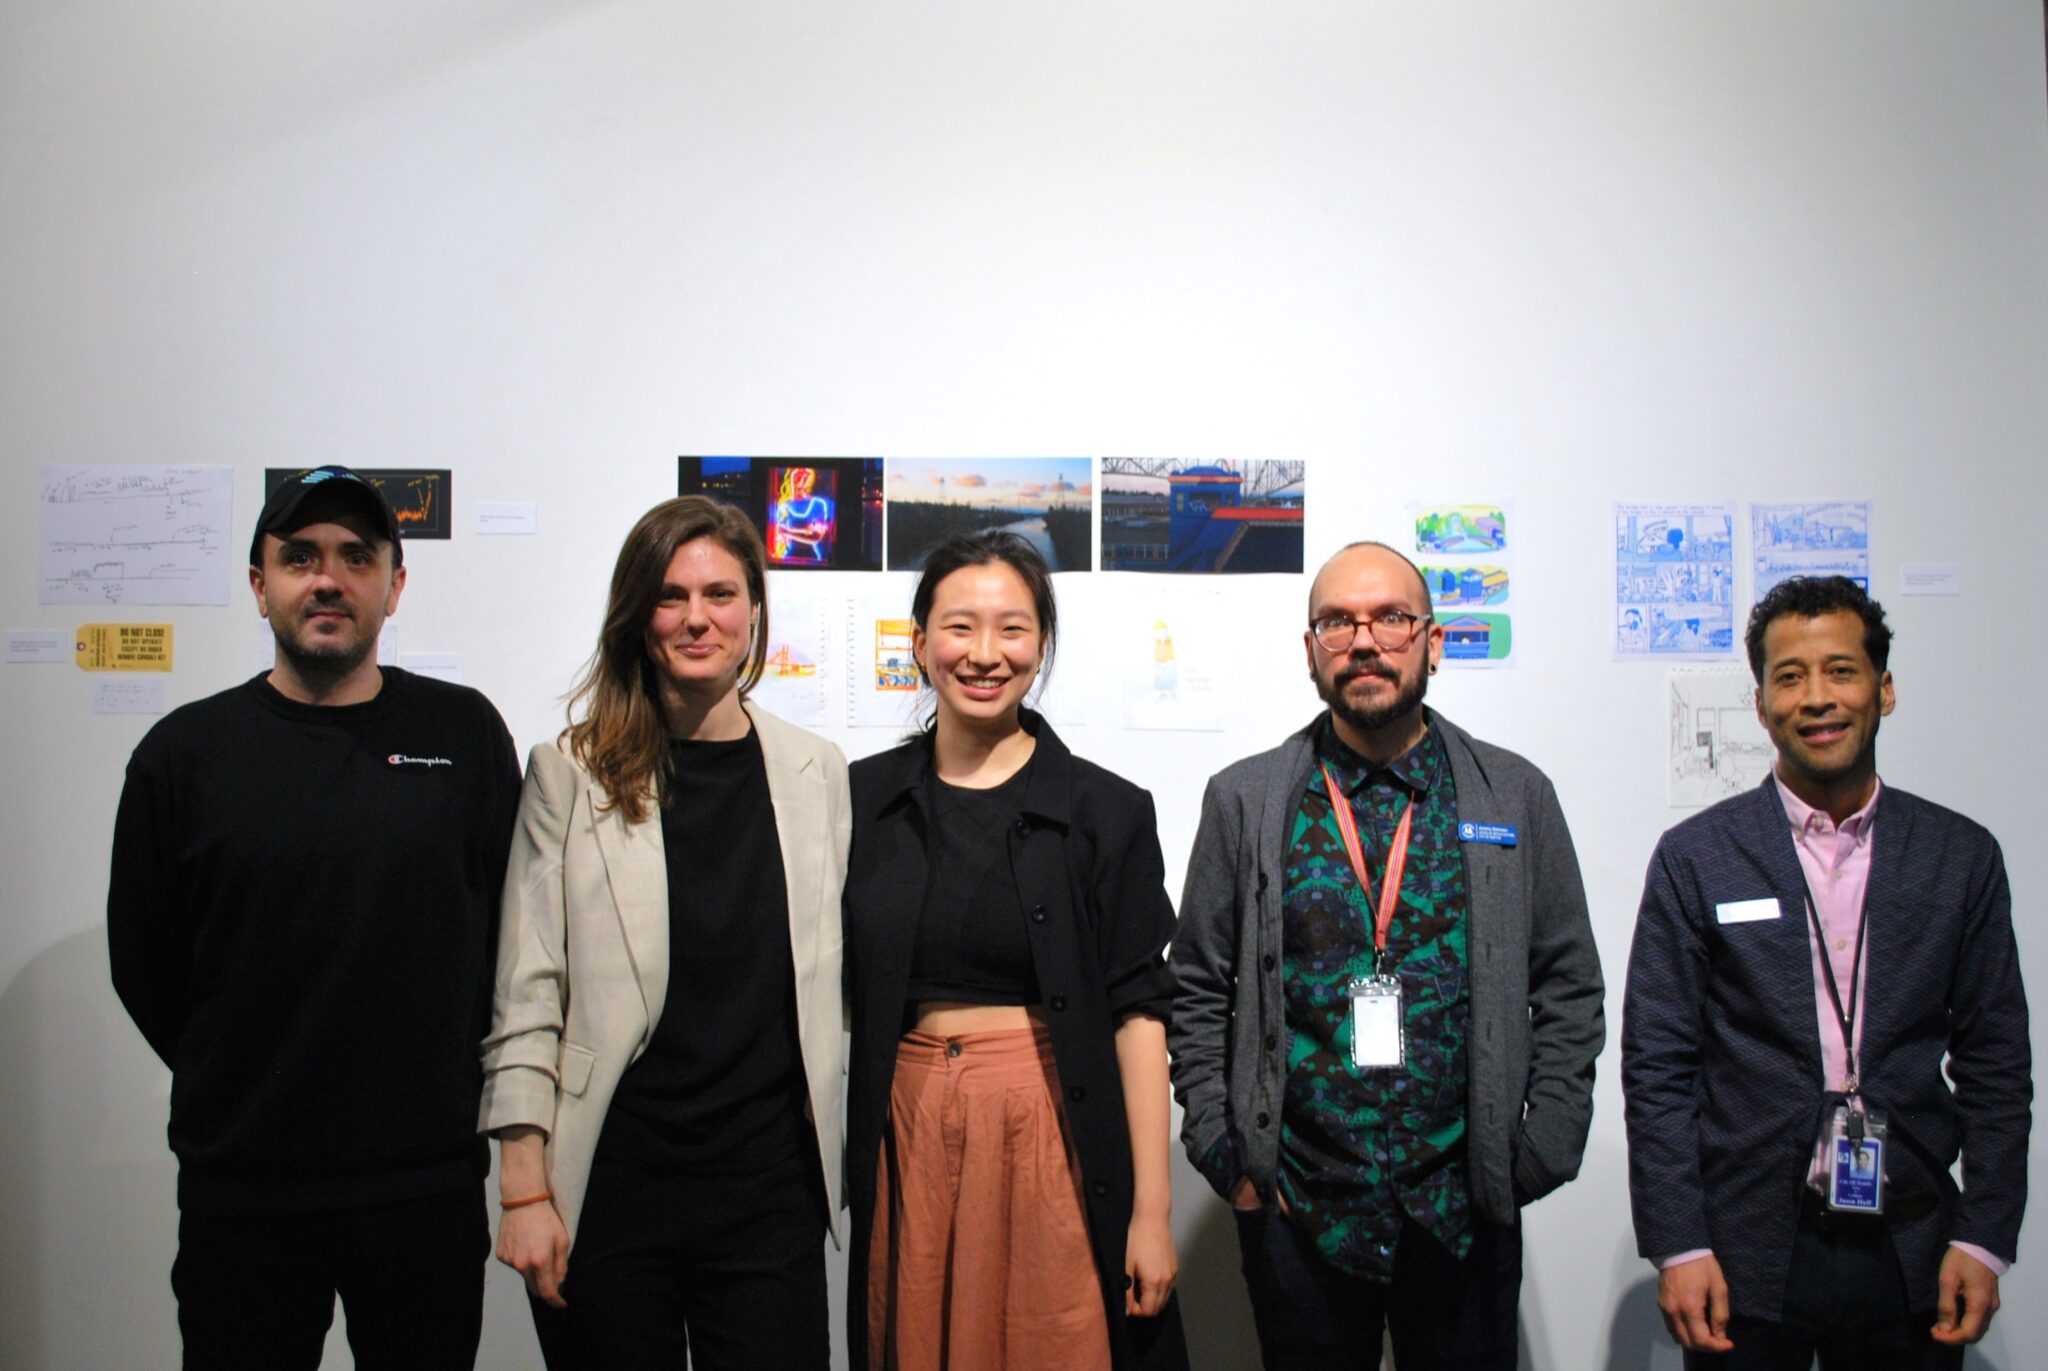 Group photo of five people standing in a line in front of art on a gallery wall